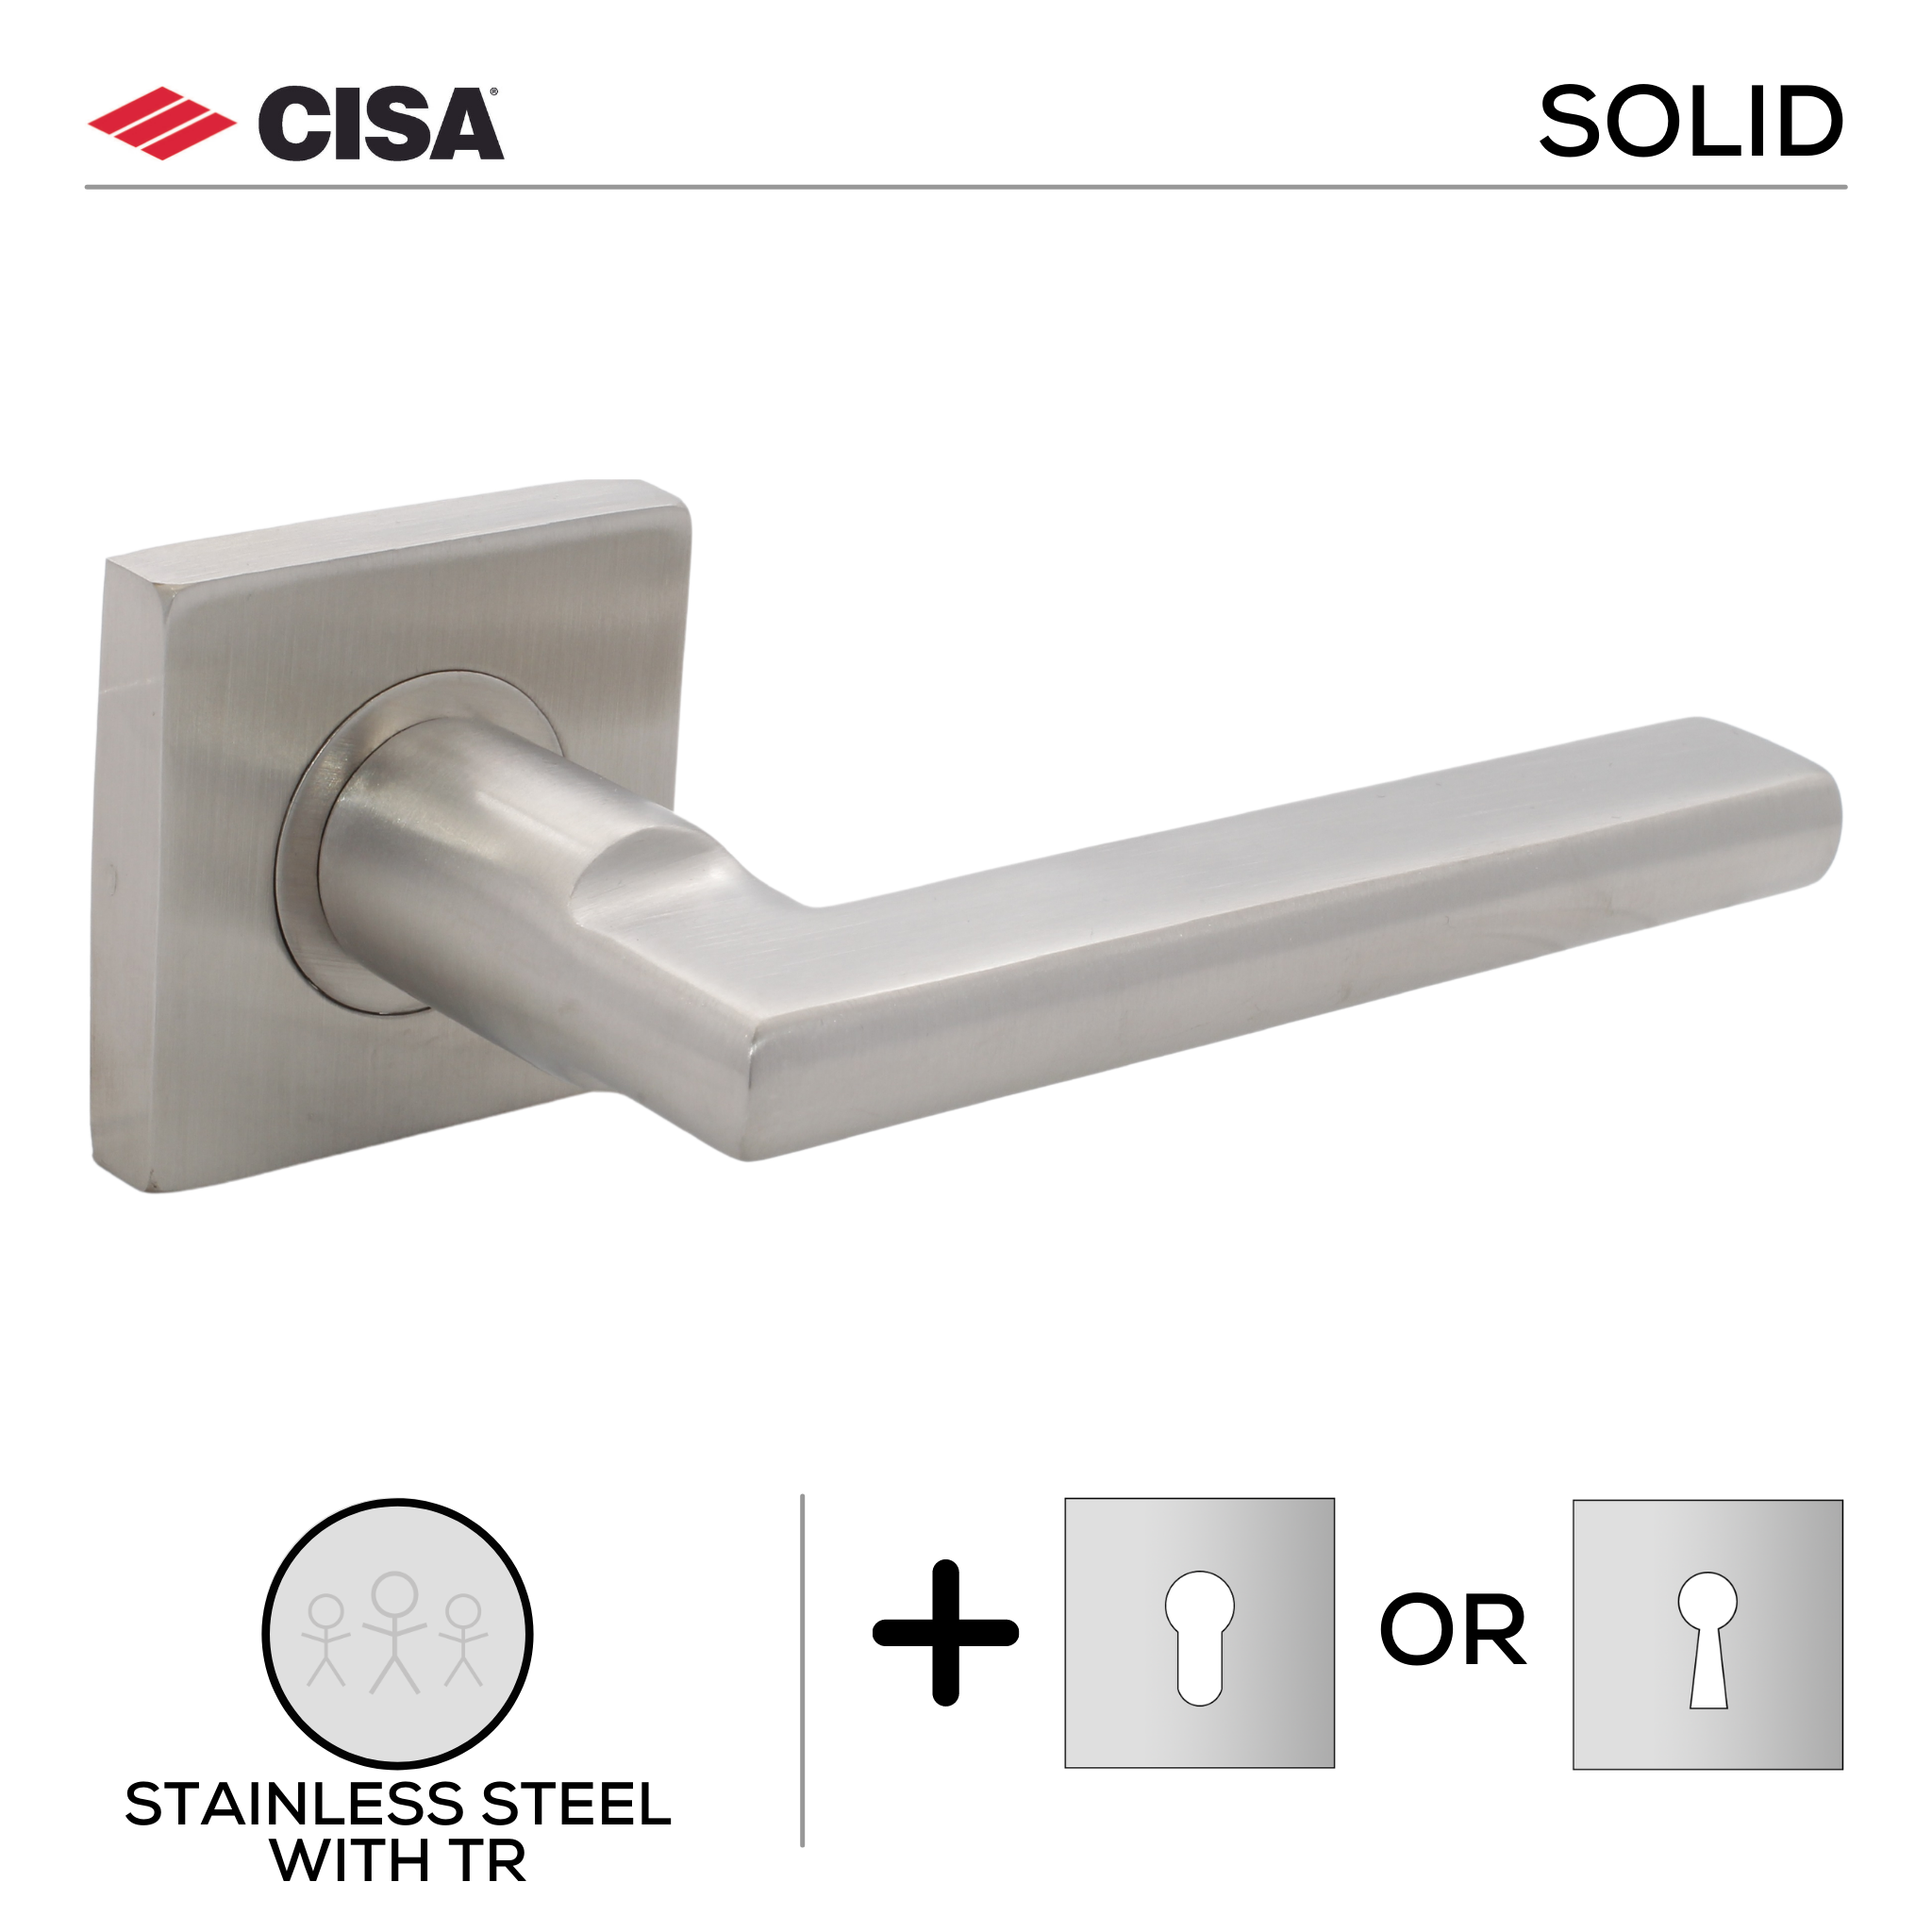 FS103.S._.TR, Lever Handles, Solid, On Square Rose, With Escutcheons, 134mm (l), Stainless Steel with Tarnish Resistant, CISA